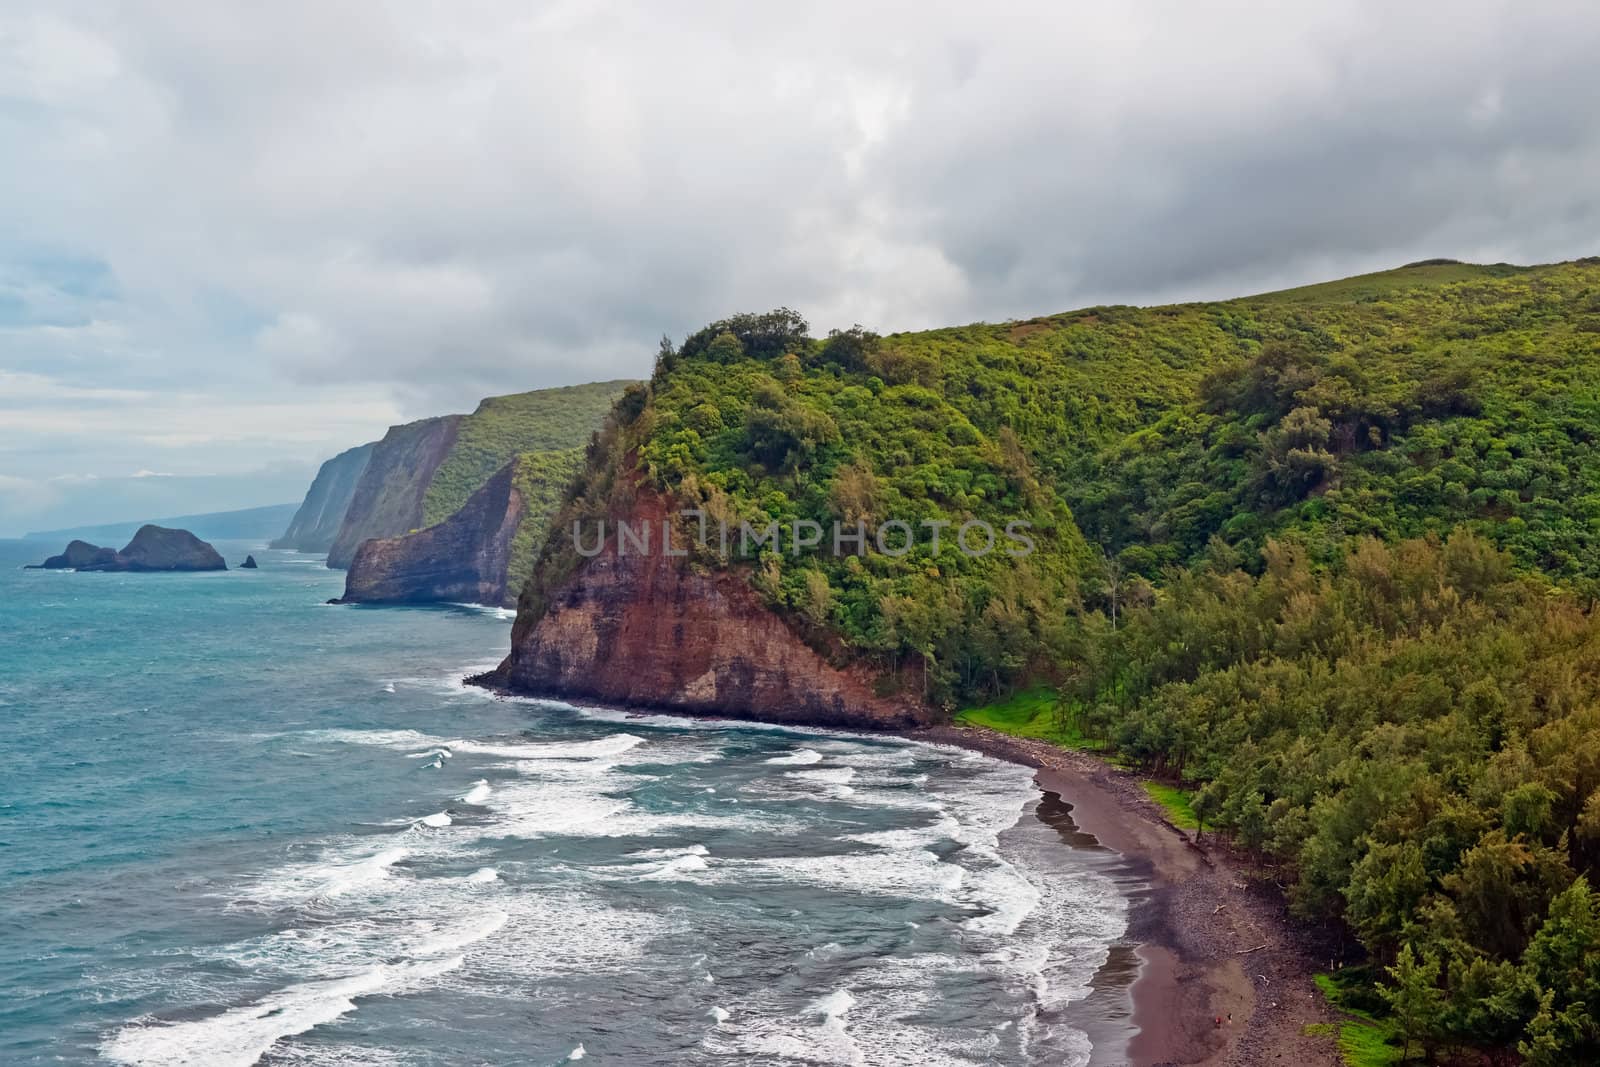 Pololu Beach on the Big Island of Hawaii. Passing the 28 mile marker on Highway 270 past Hawi it is a breathtaking view of Polulu Valley. It's a 30 minute hike over rough ground. But worth it